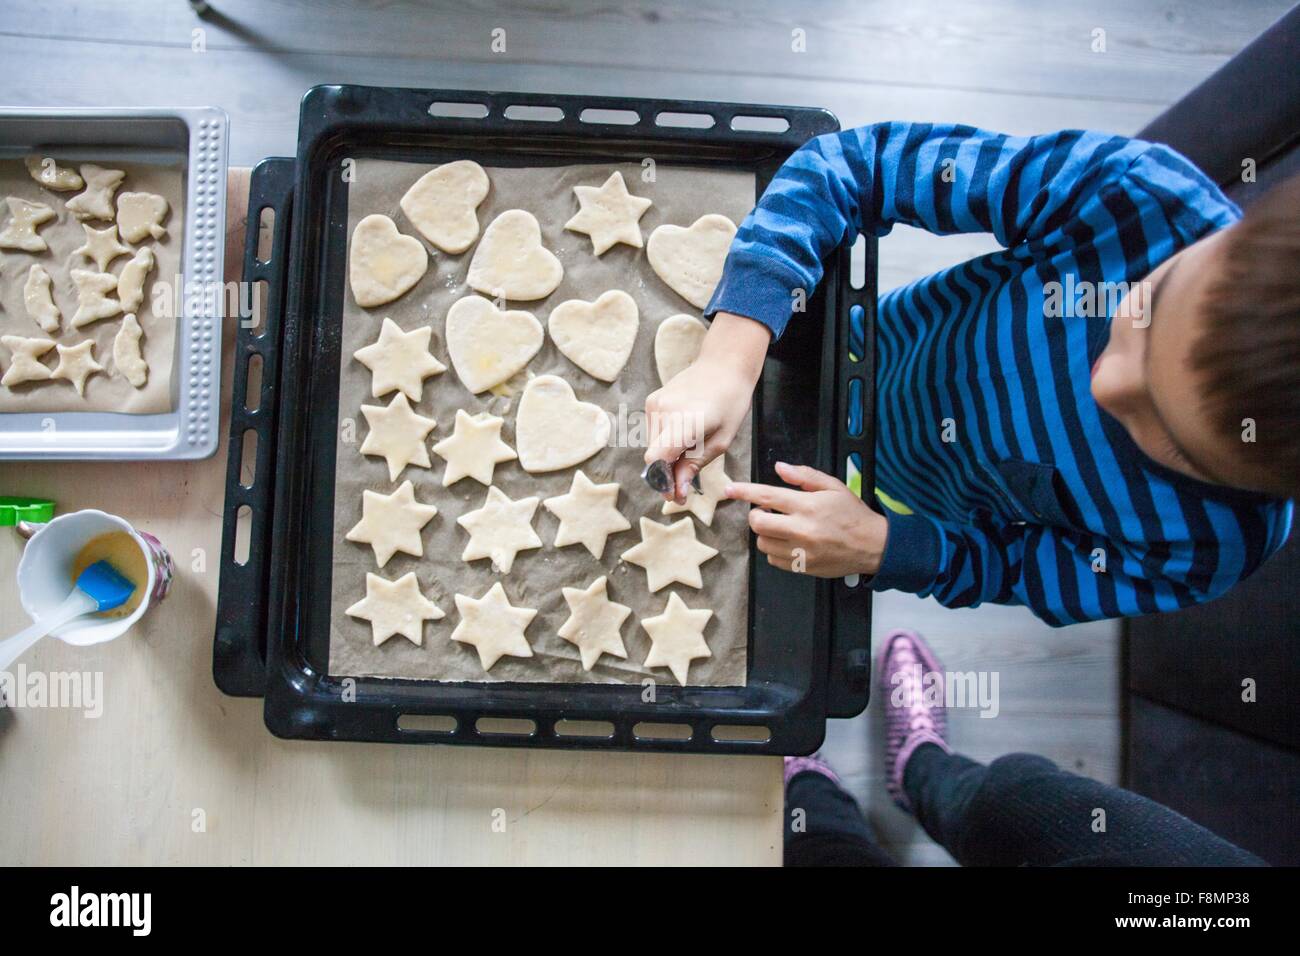 Young boy making cookies, overhead view Stock Photo